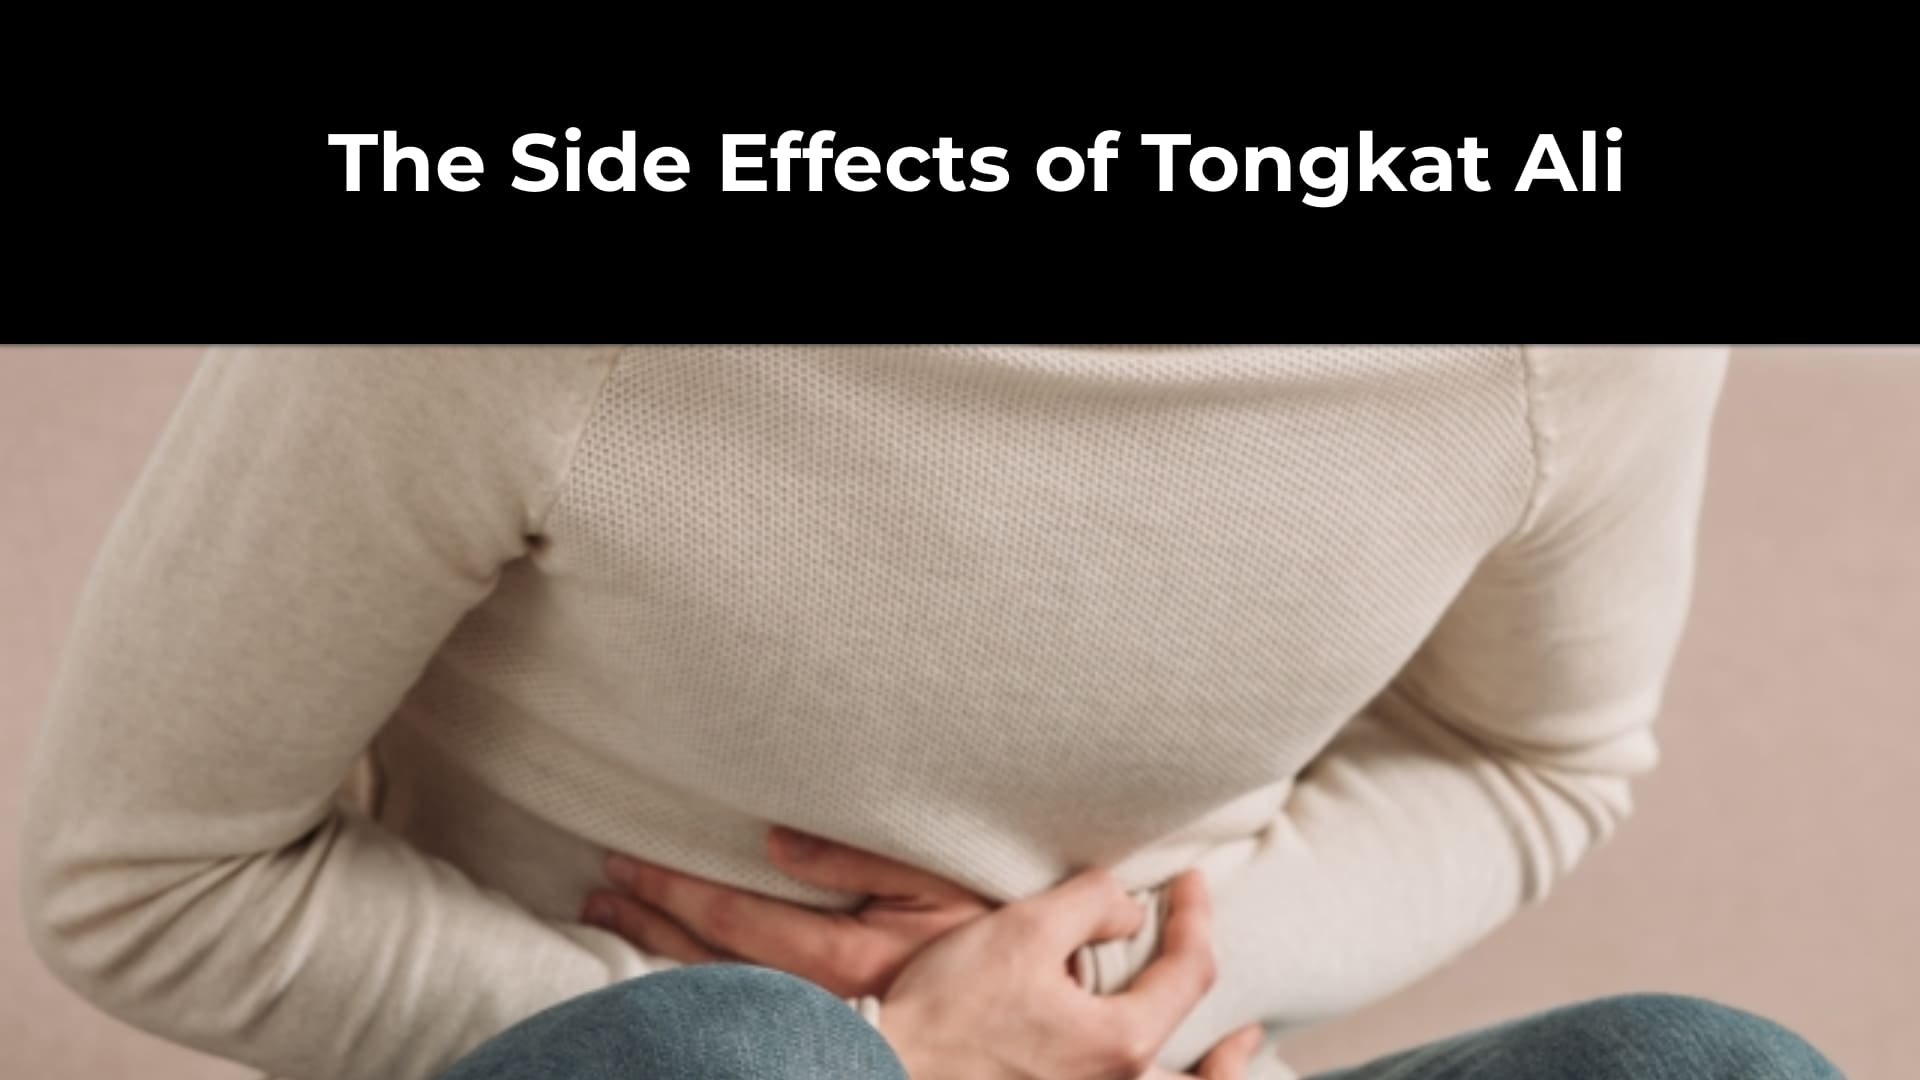 The Side Effects of Tongkat Ali